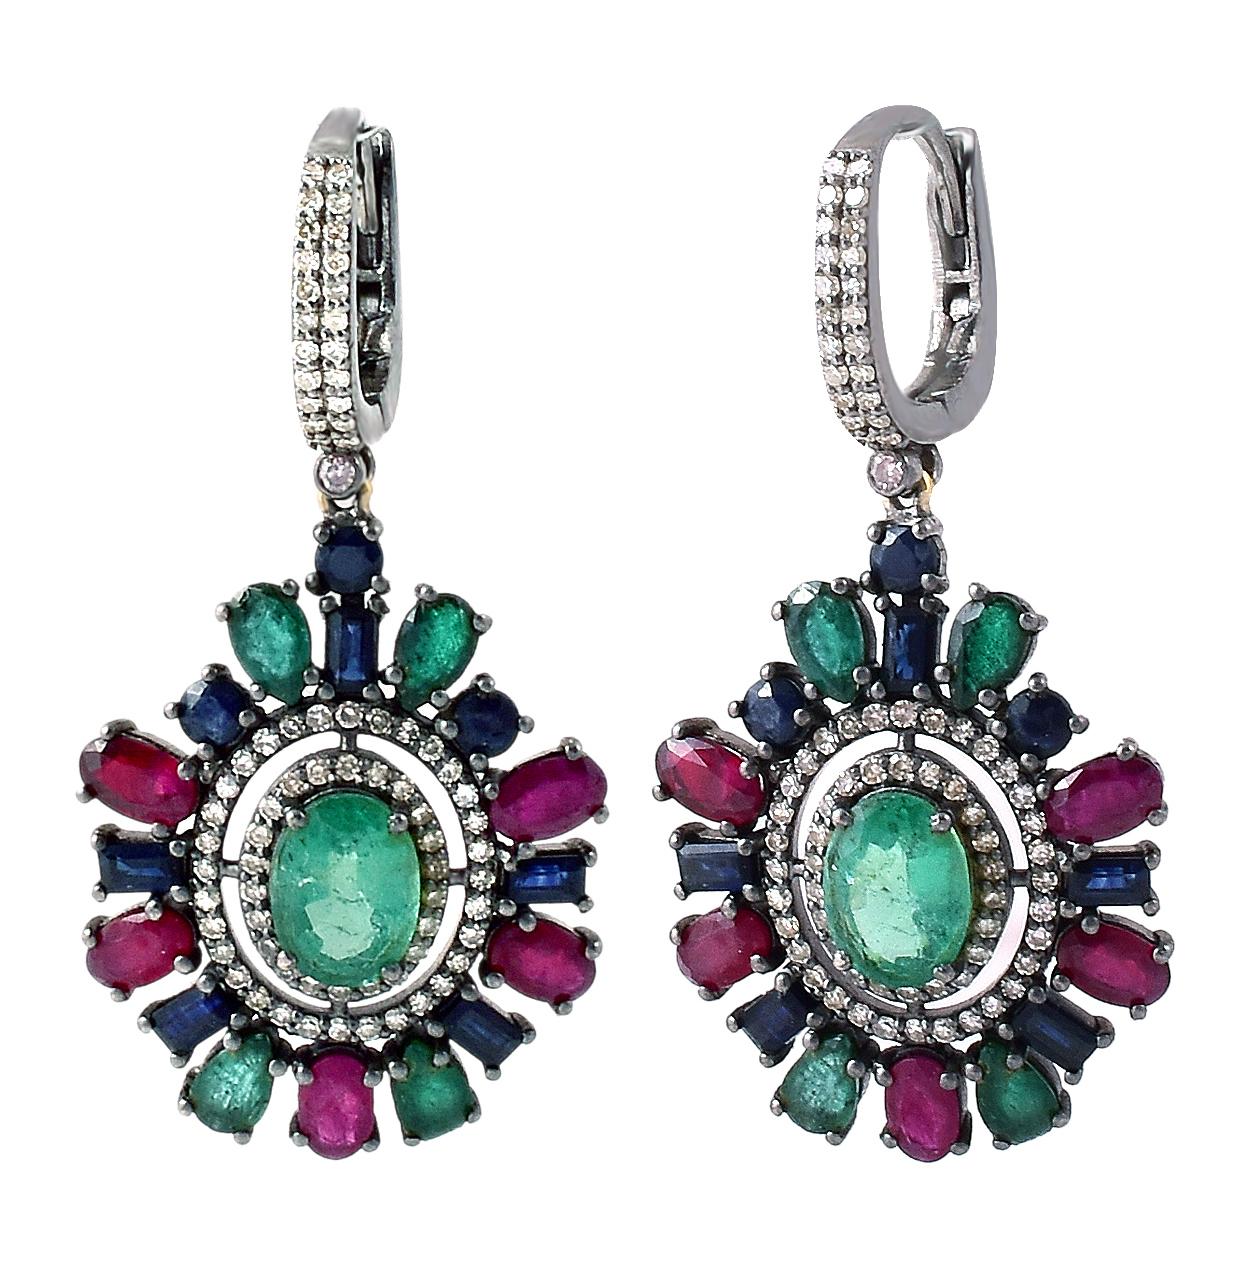 Art-Deco Style Diamond, Ruby, Sapphire, and Natural Emerald Drop Earrings

This art-deco lively glorious precious stone and diamond earring is magnificent. The center solitaire emerald is beautifully surrounded with a single row of pave diamond